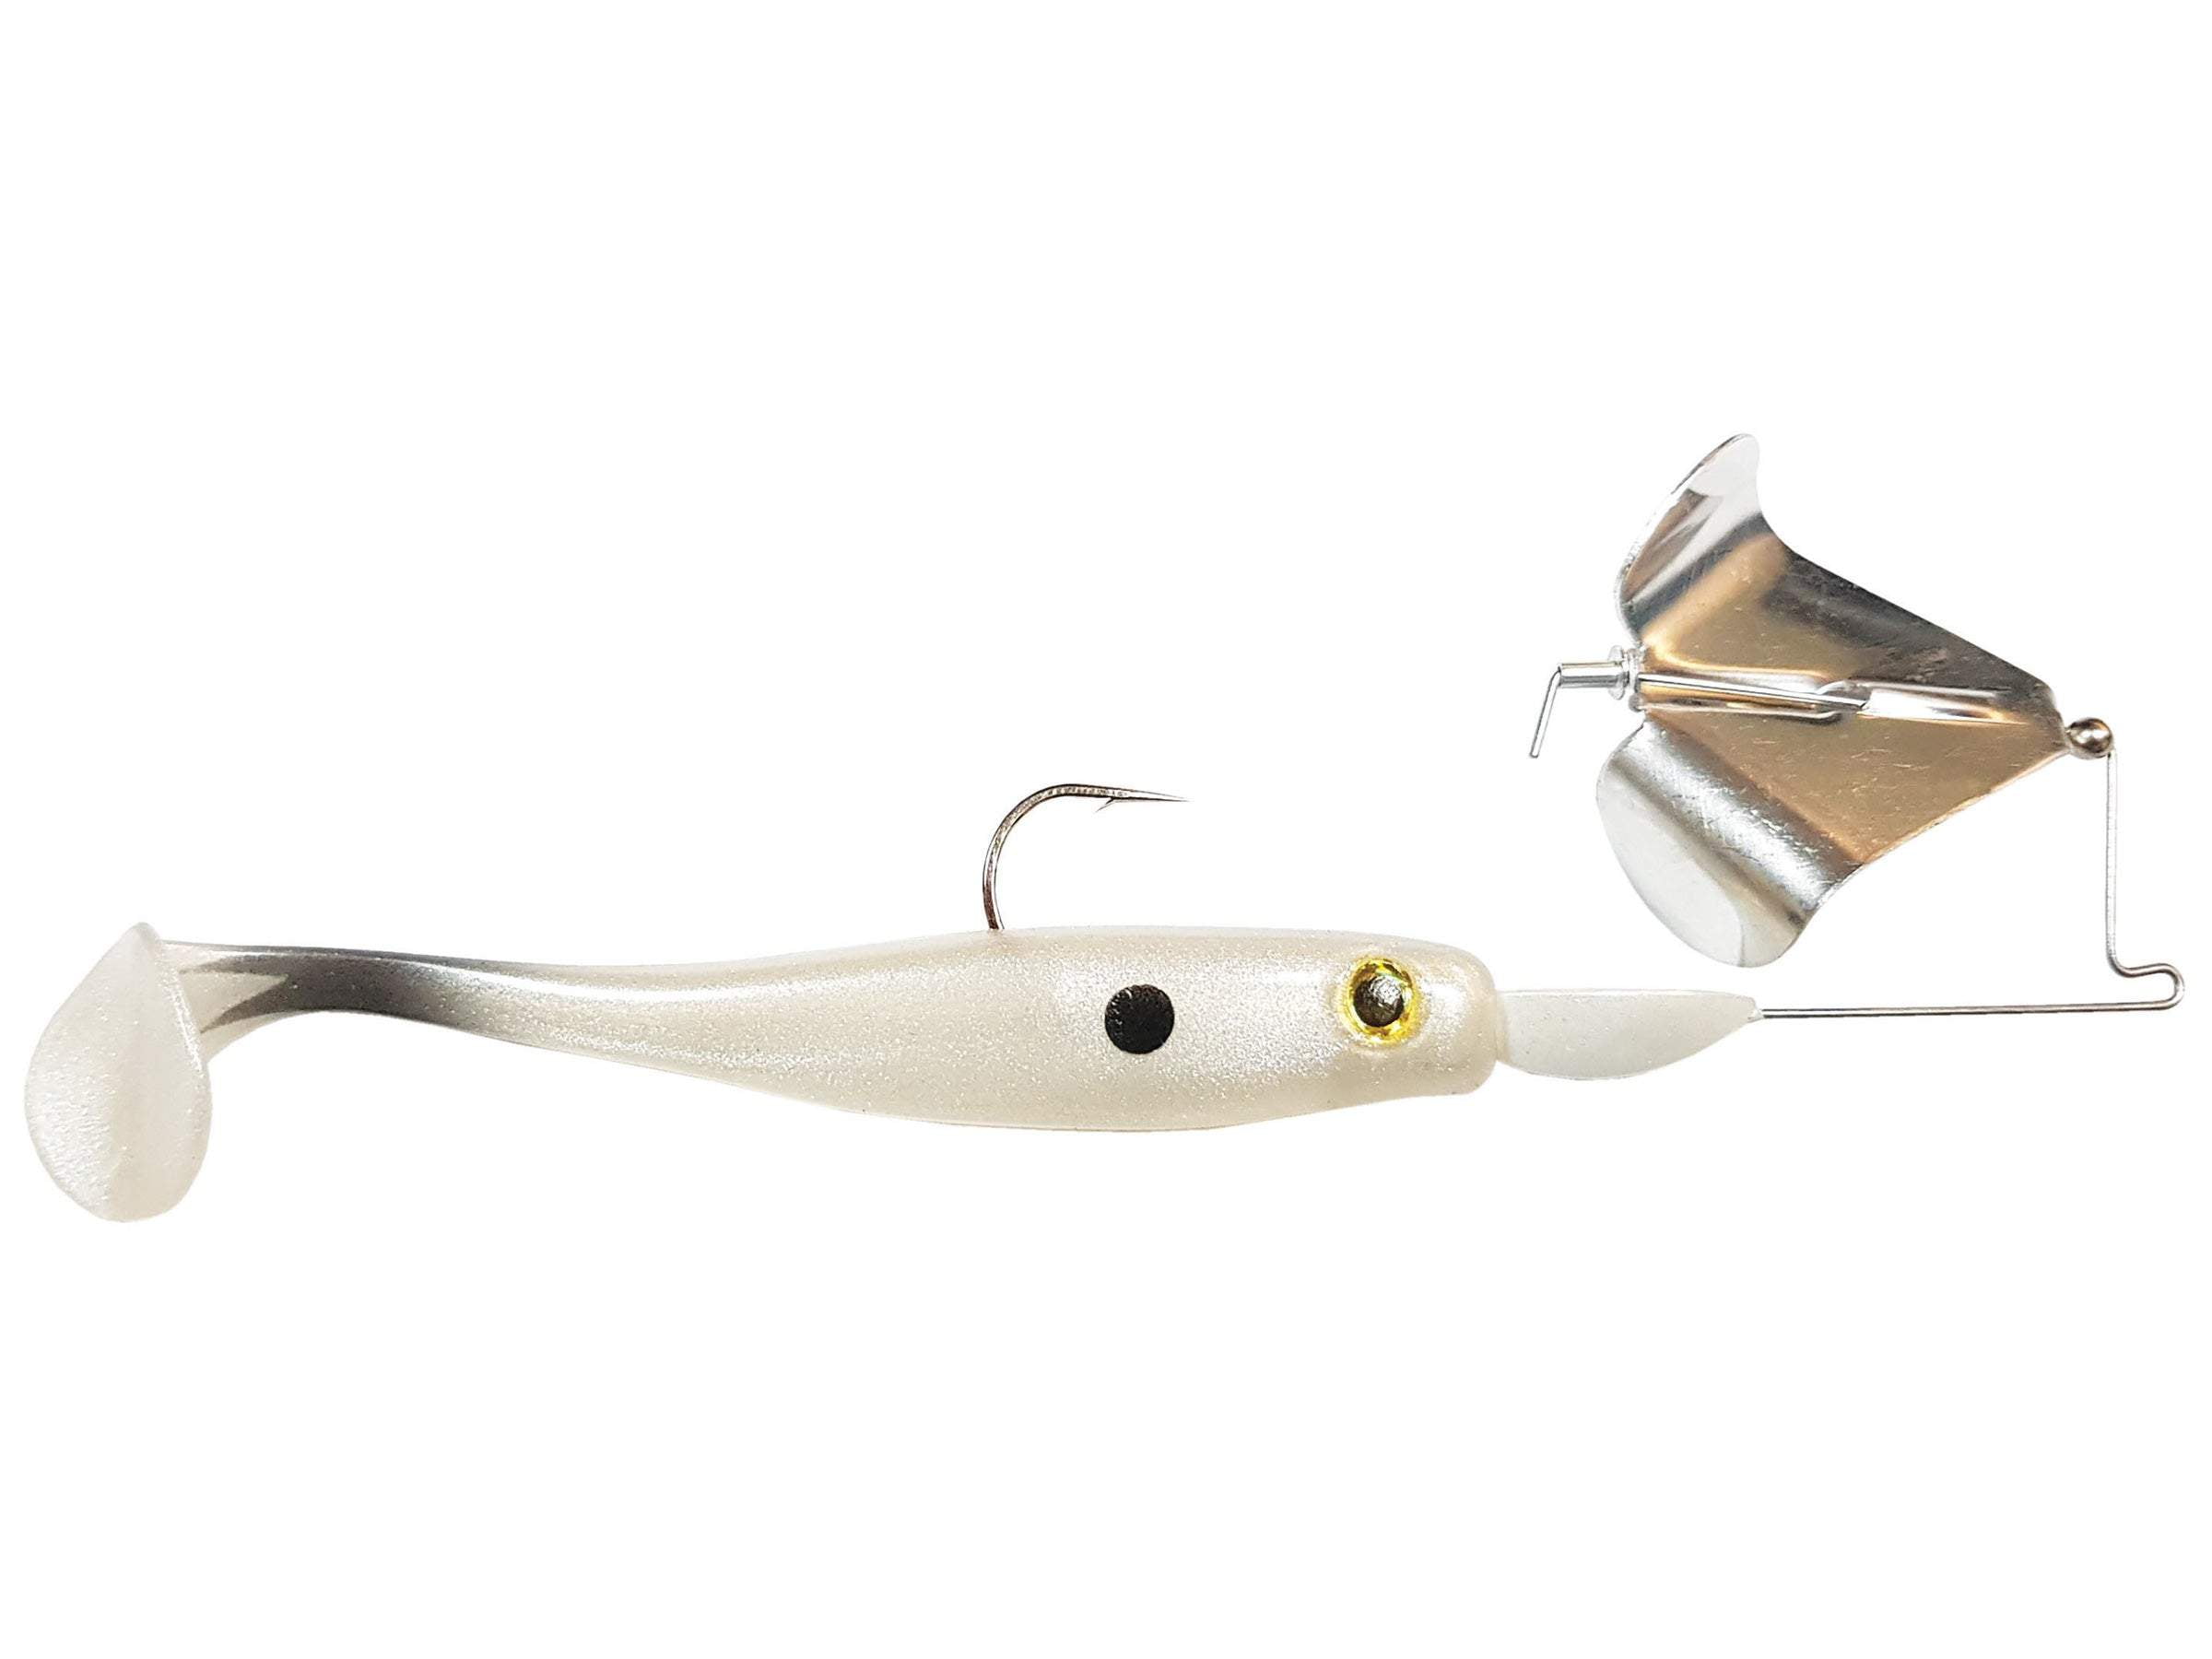 Big Bite Baits Suicide Shad Buzzbait (Silver Blade/Pearly Shad, 1/4 ounce)  